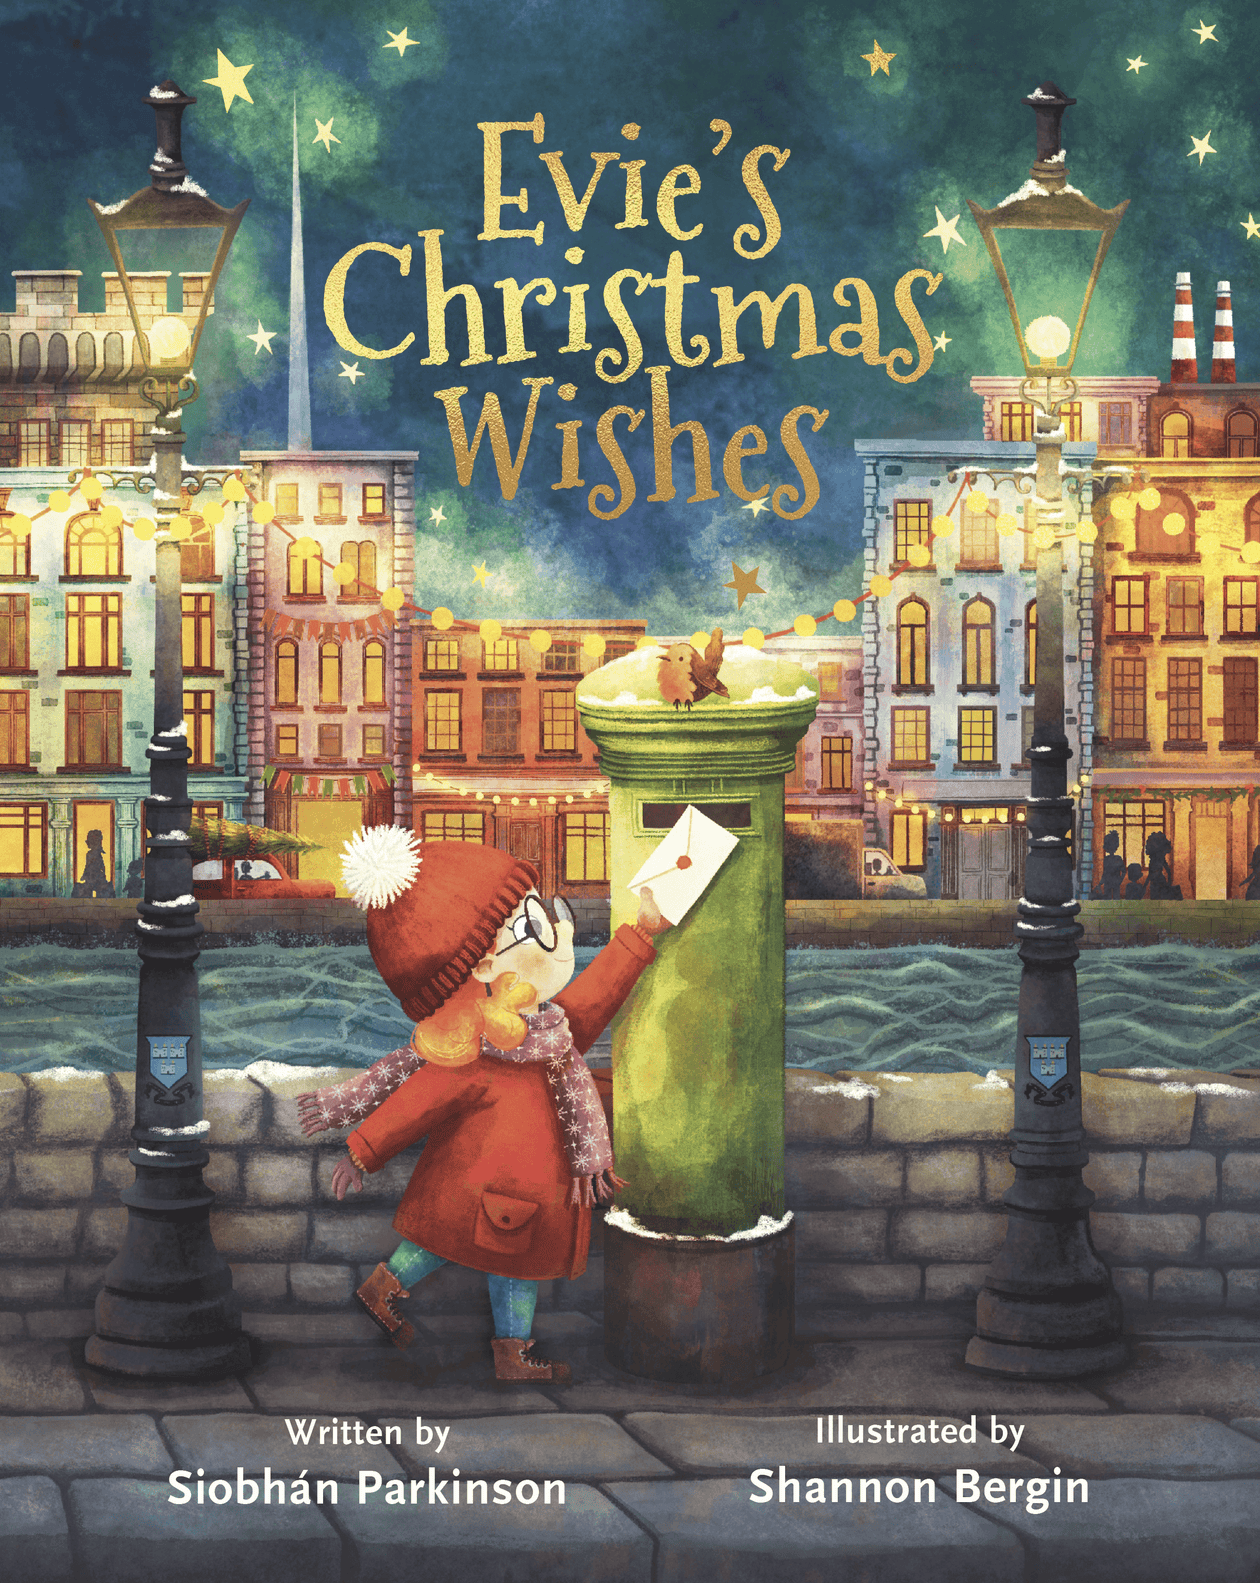 Evie's Christmas Wishes by Siobhan Parkinson, illustrated by Shannon Bergin